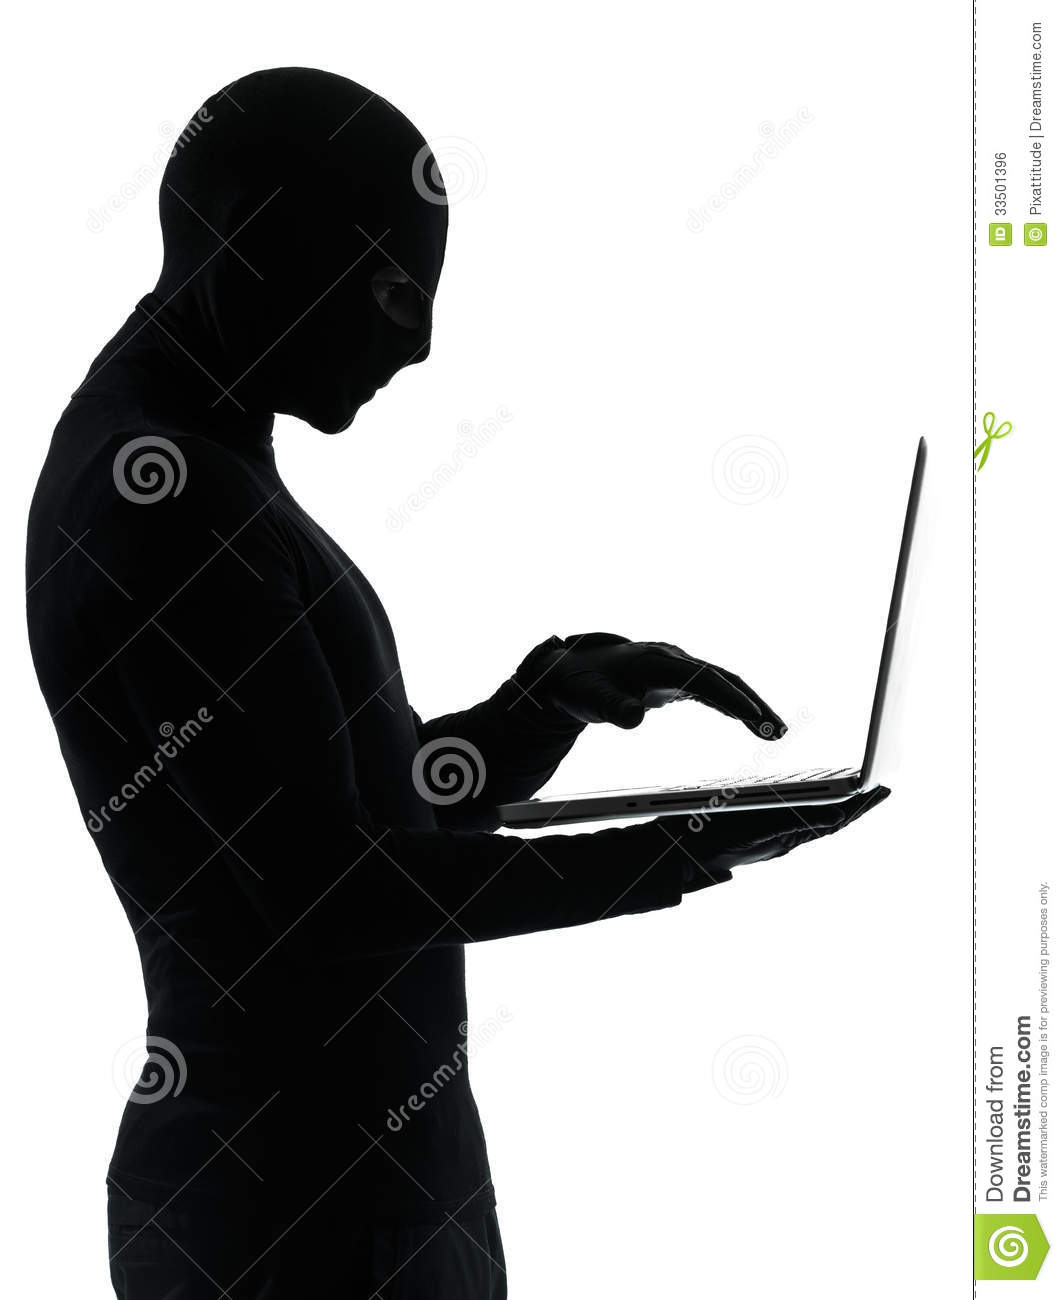 Thief Criminal Computer Hacker In Silhouette Studio Isolated On White